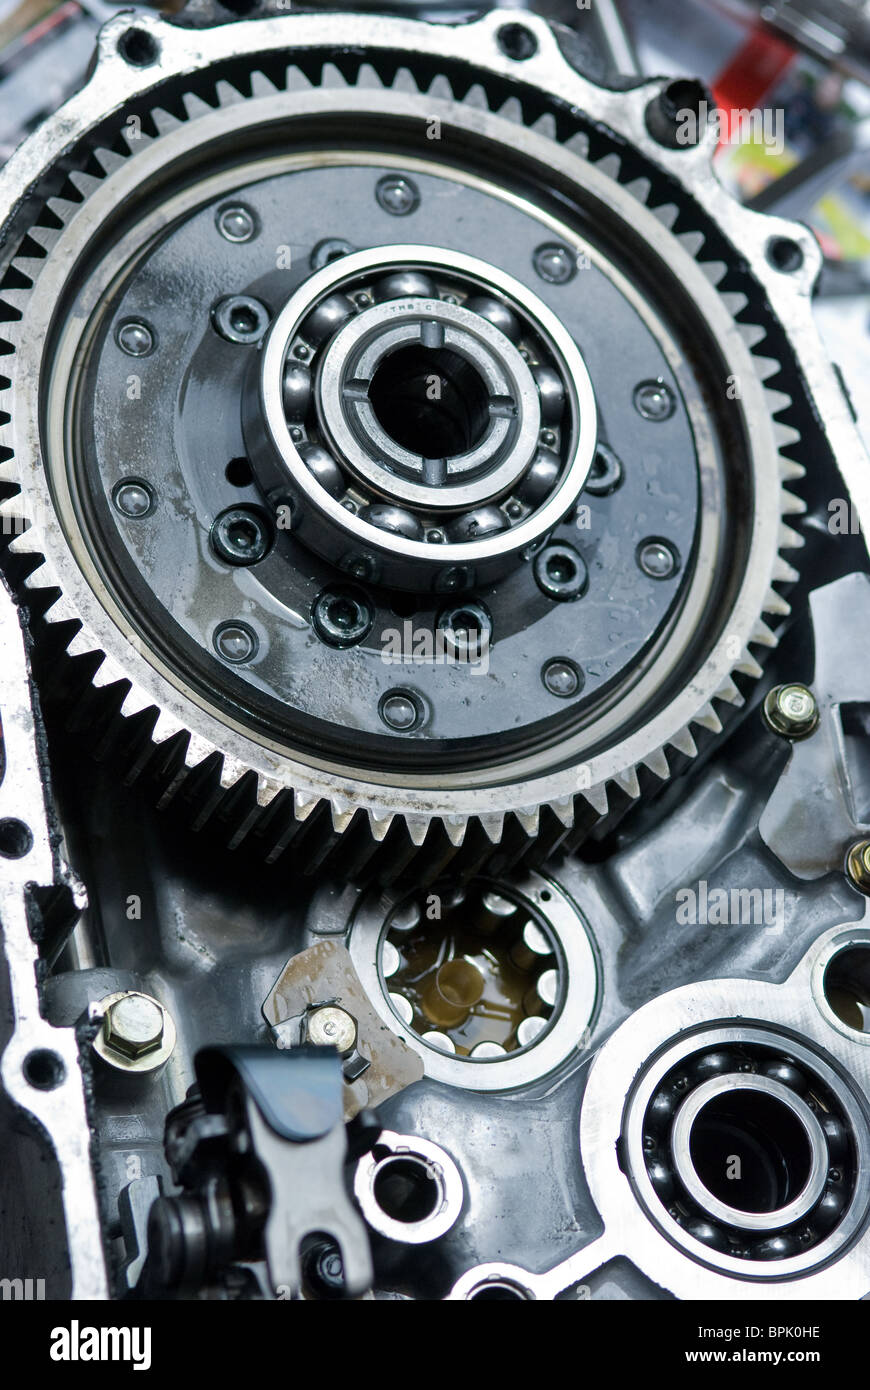 Inside of a car gearbox with ball bearings. Stock Photo